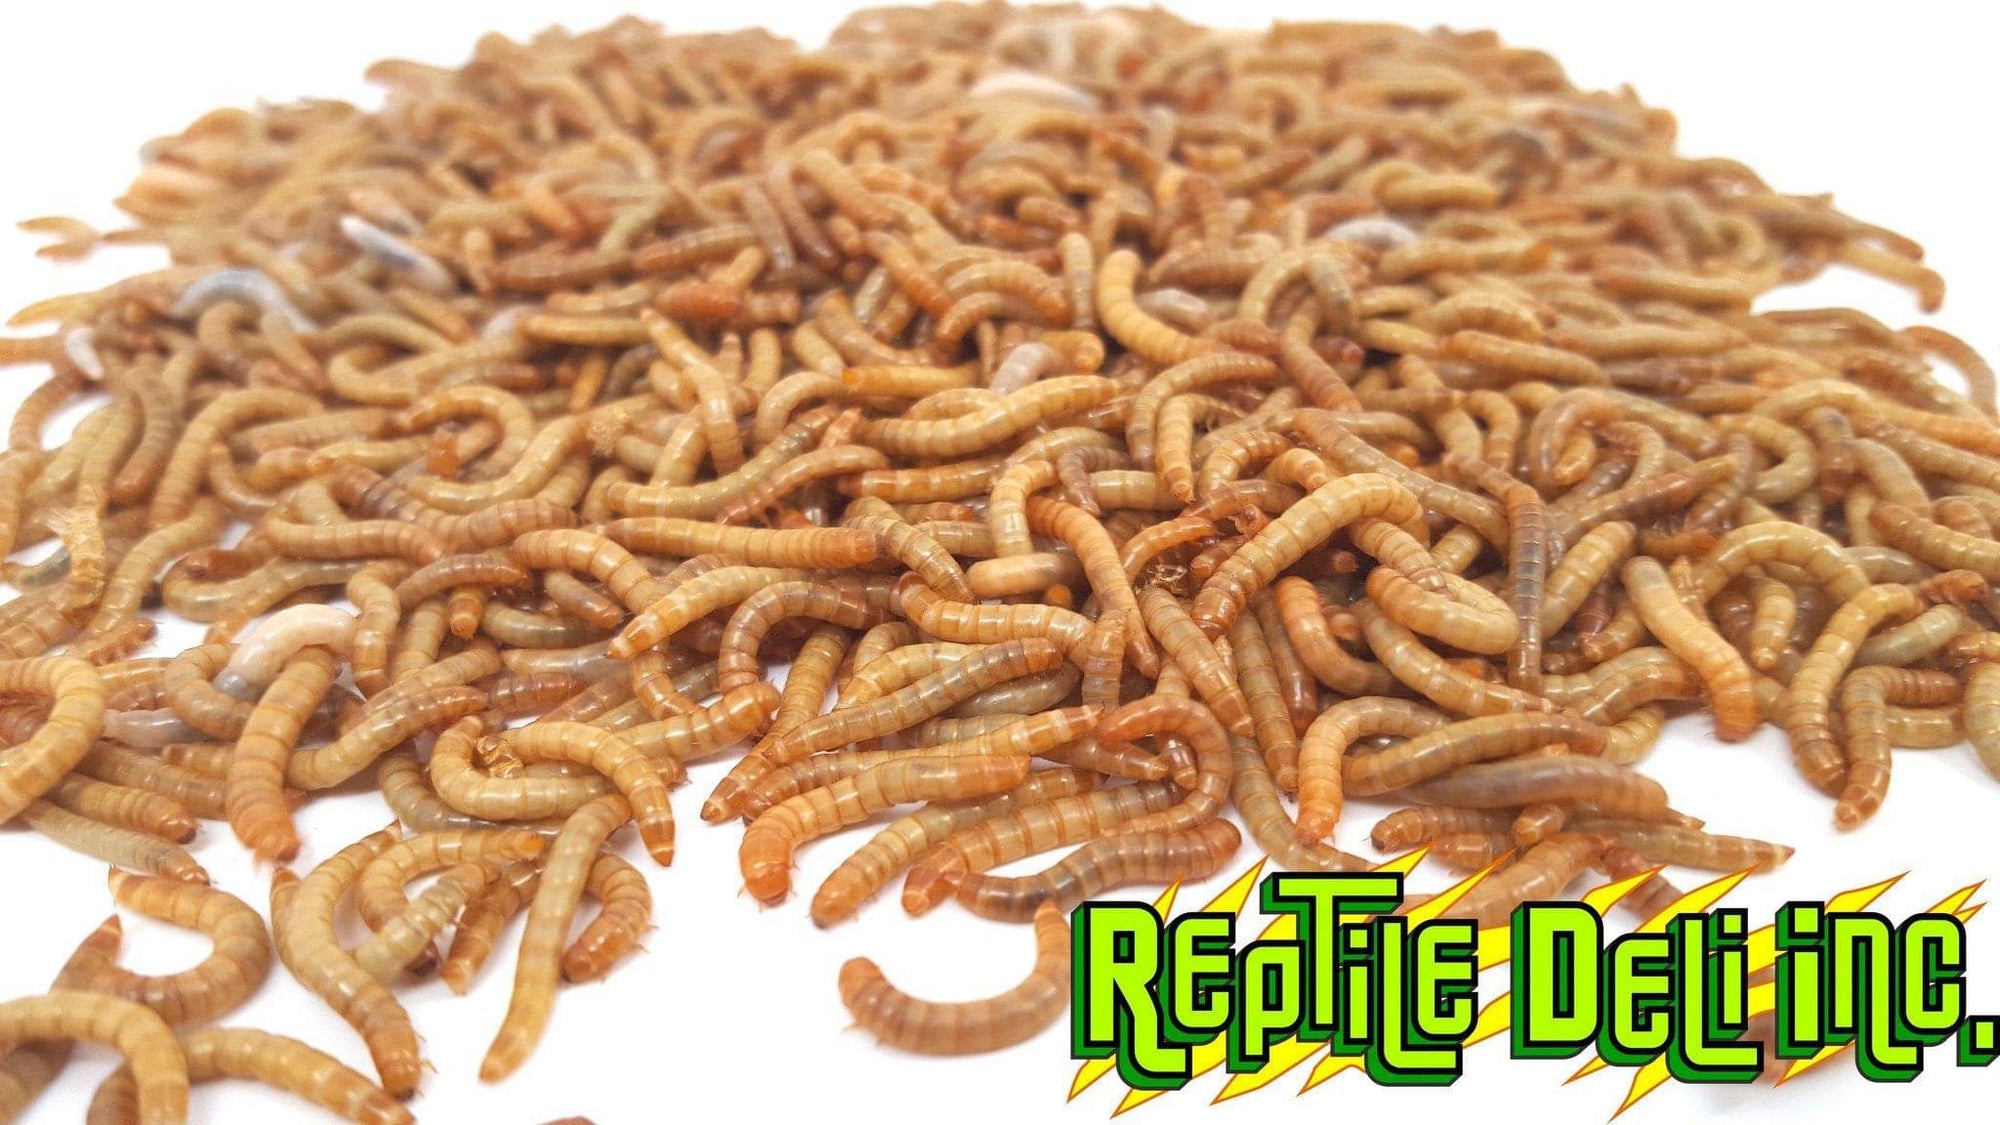 Meal Worms - Large - Reptile Deli Inc.